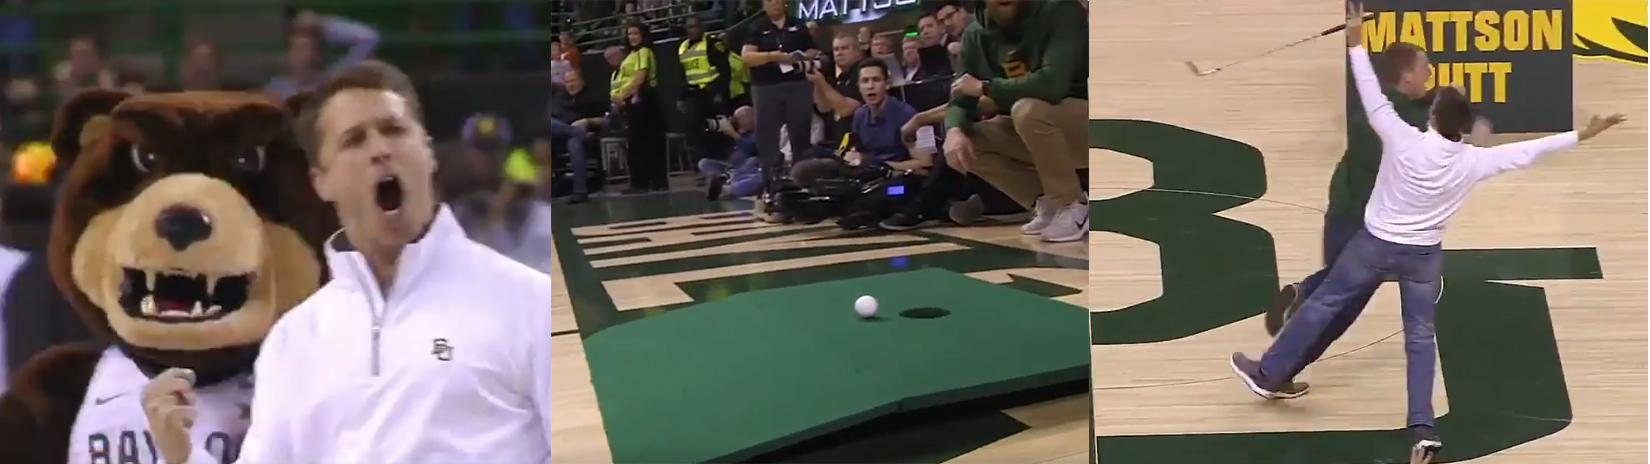 $5000 Putt at College Basketball Game